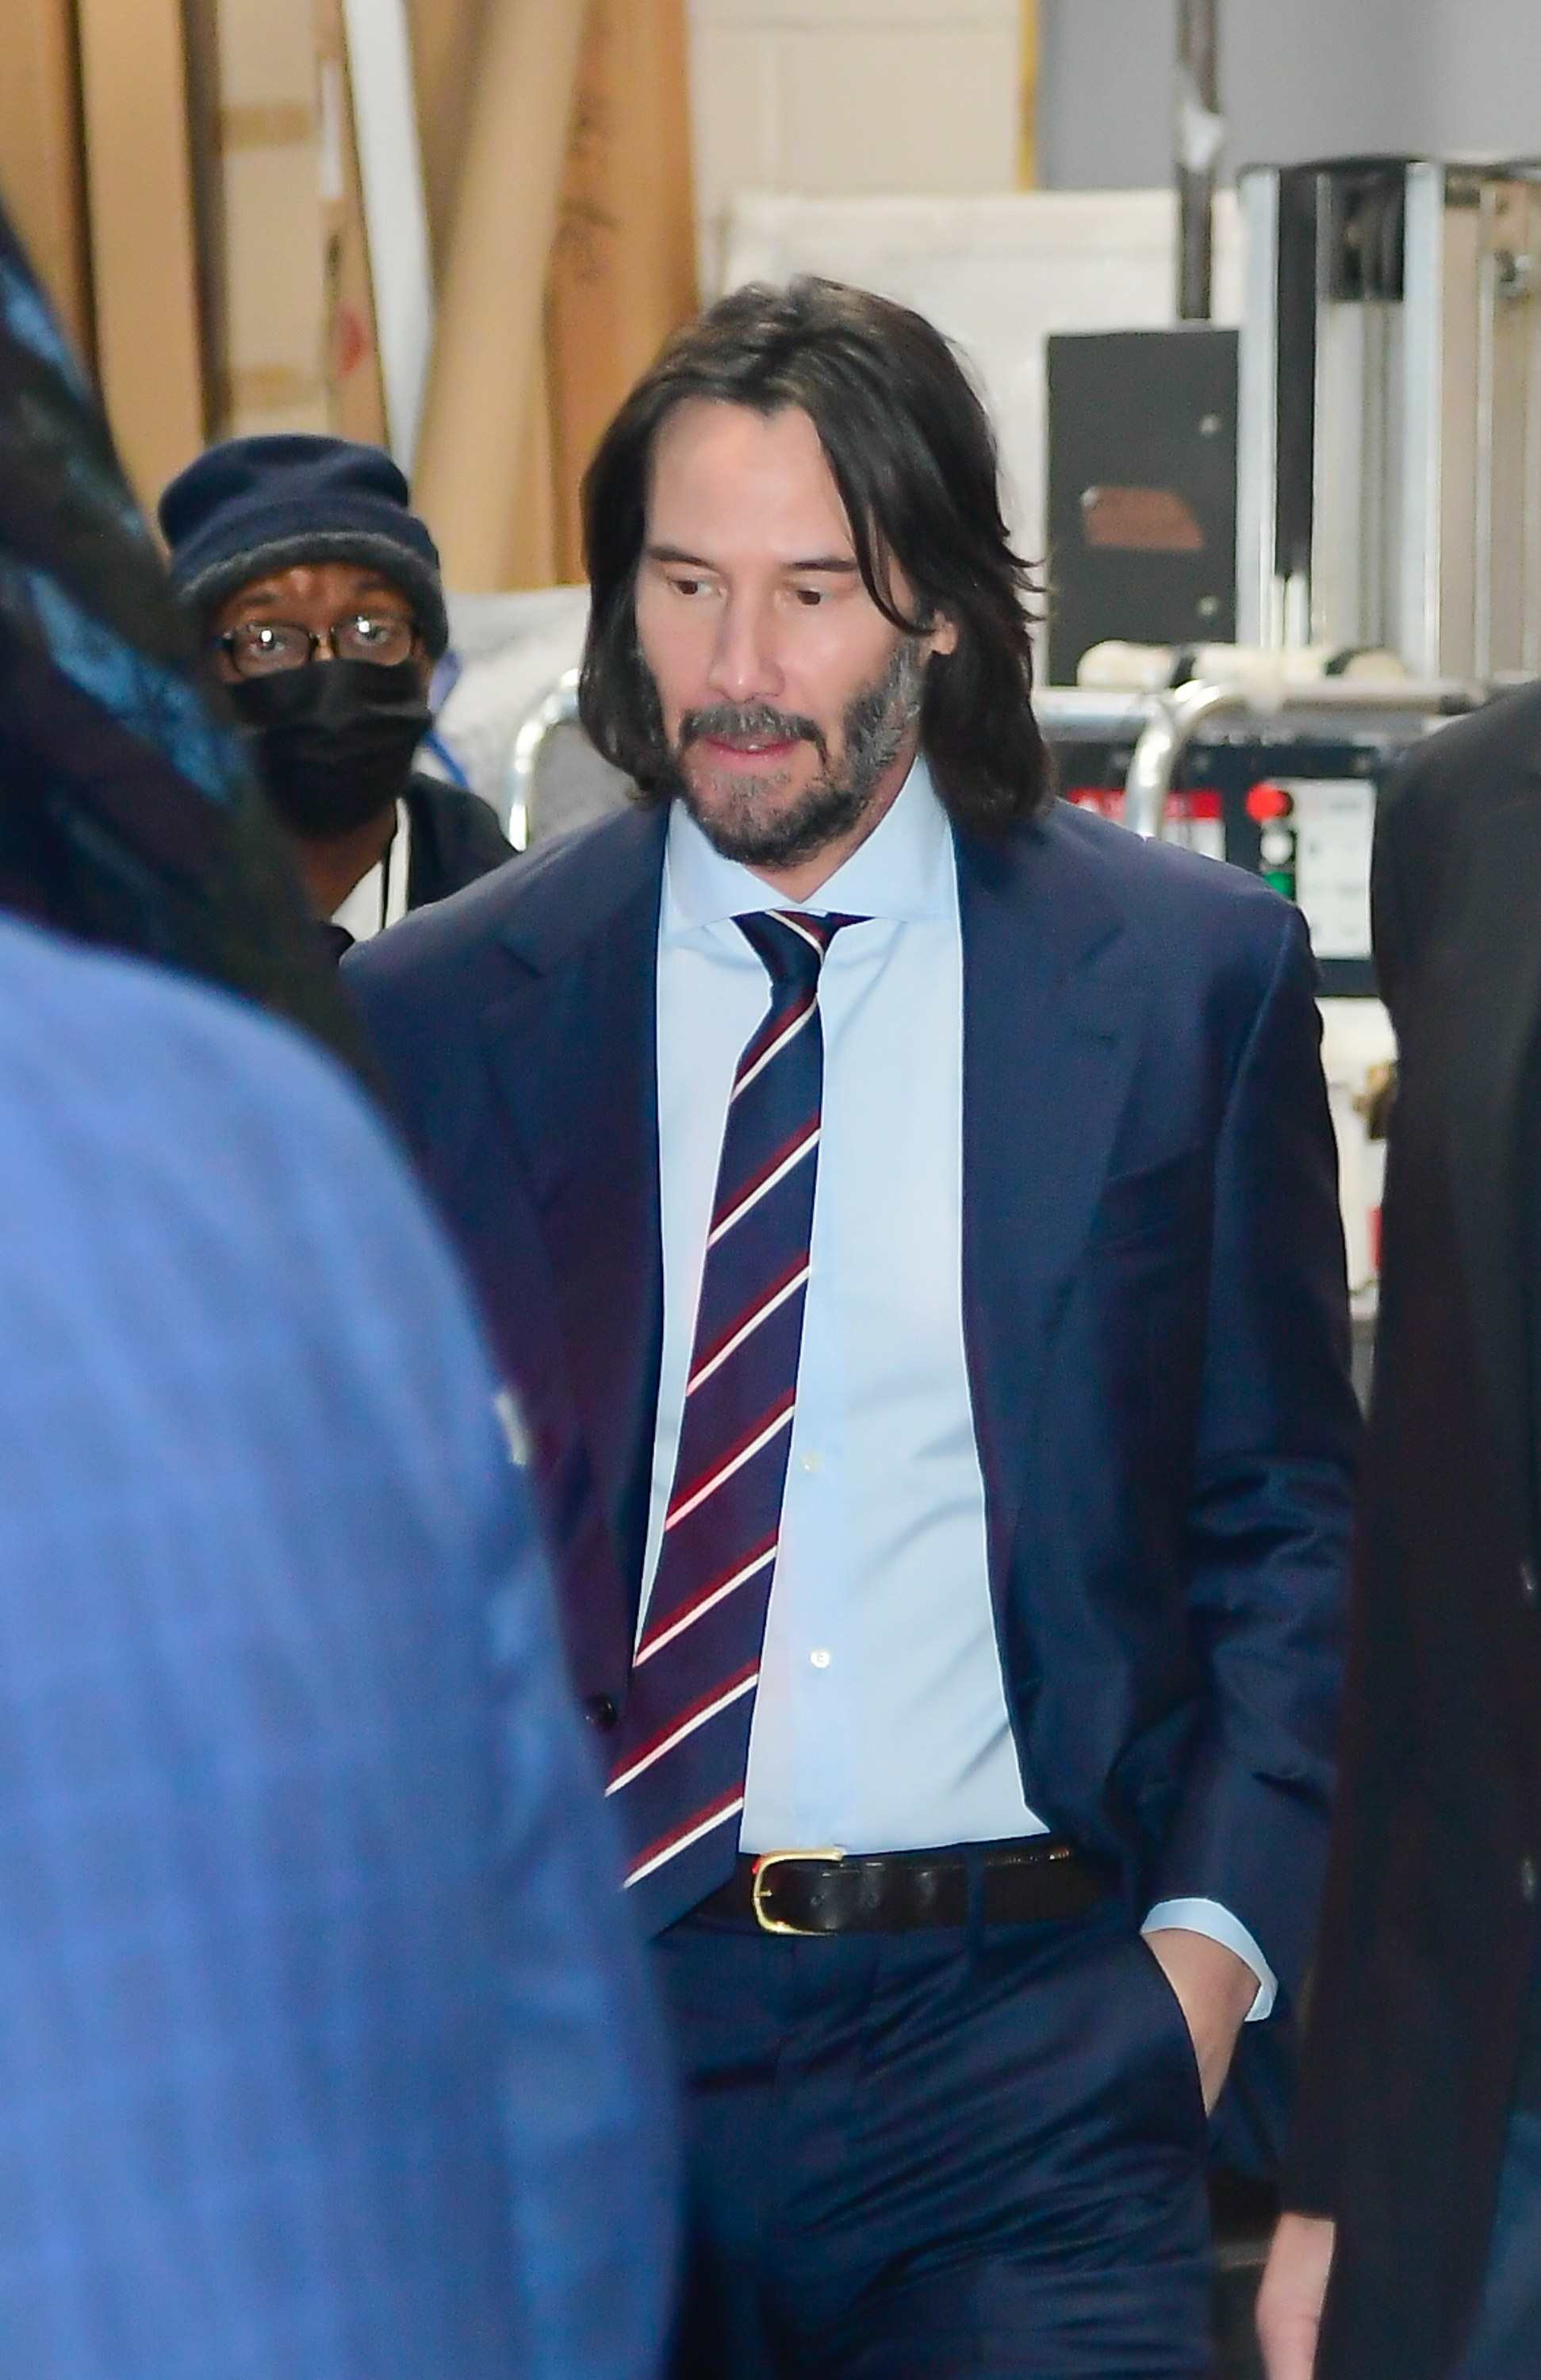 Keanu looks down while walking outside and wearing a suit and tie